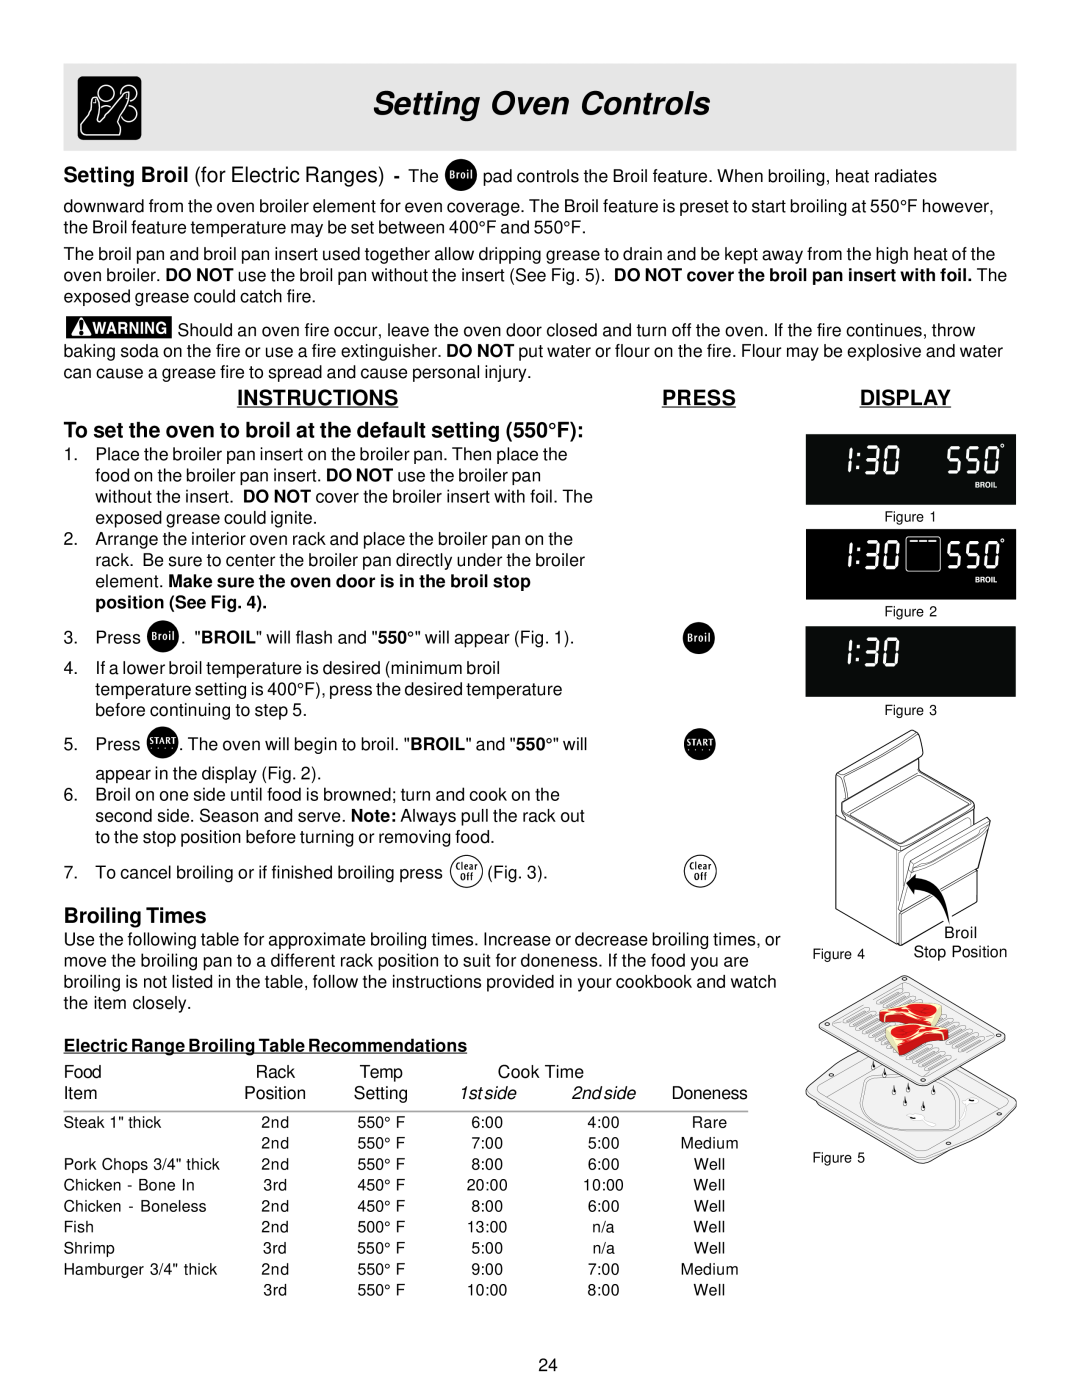 Frigidaire ES40 To set the oven to broil at the default setting 550F, Broiling Times, Setting Oven Controls, Instructions 